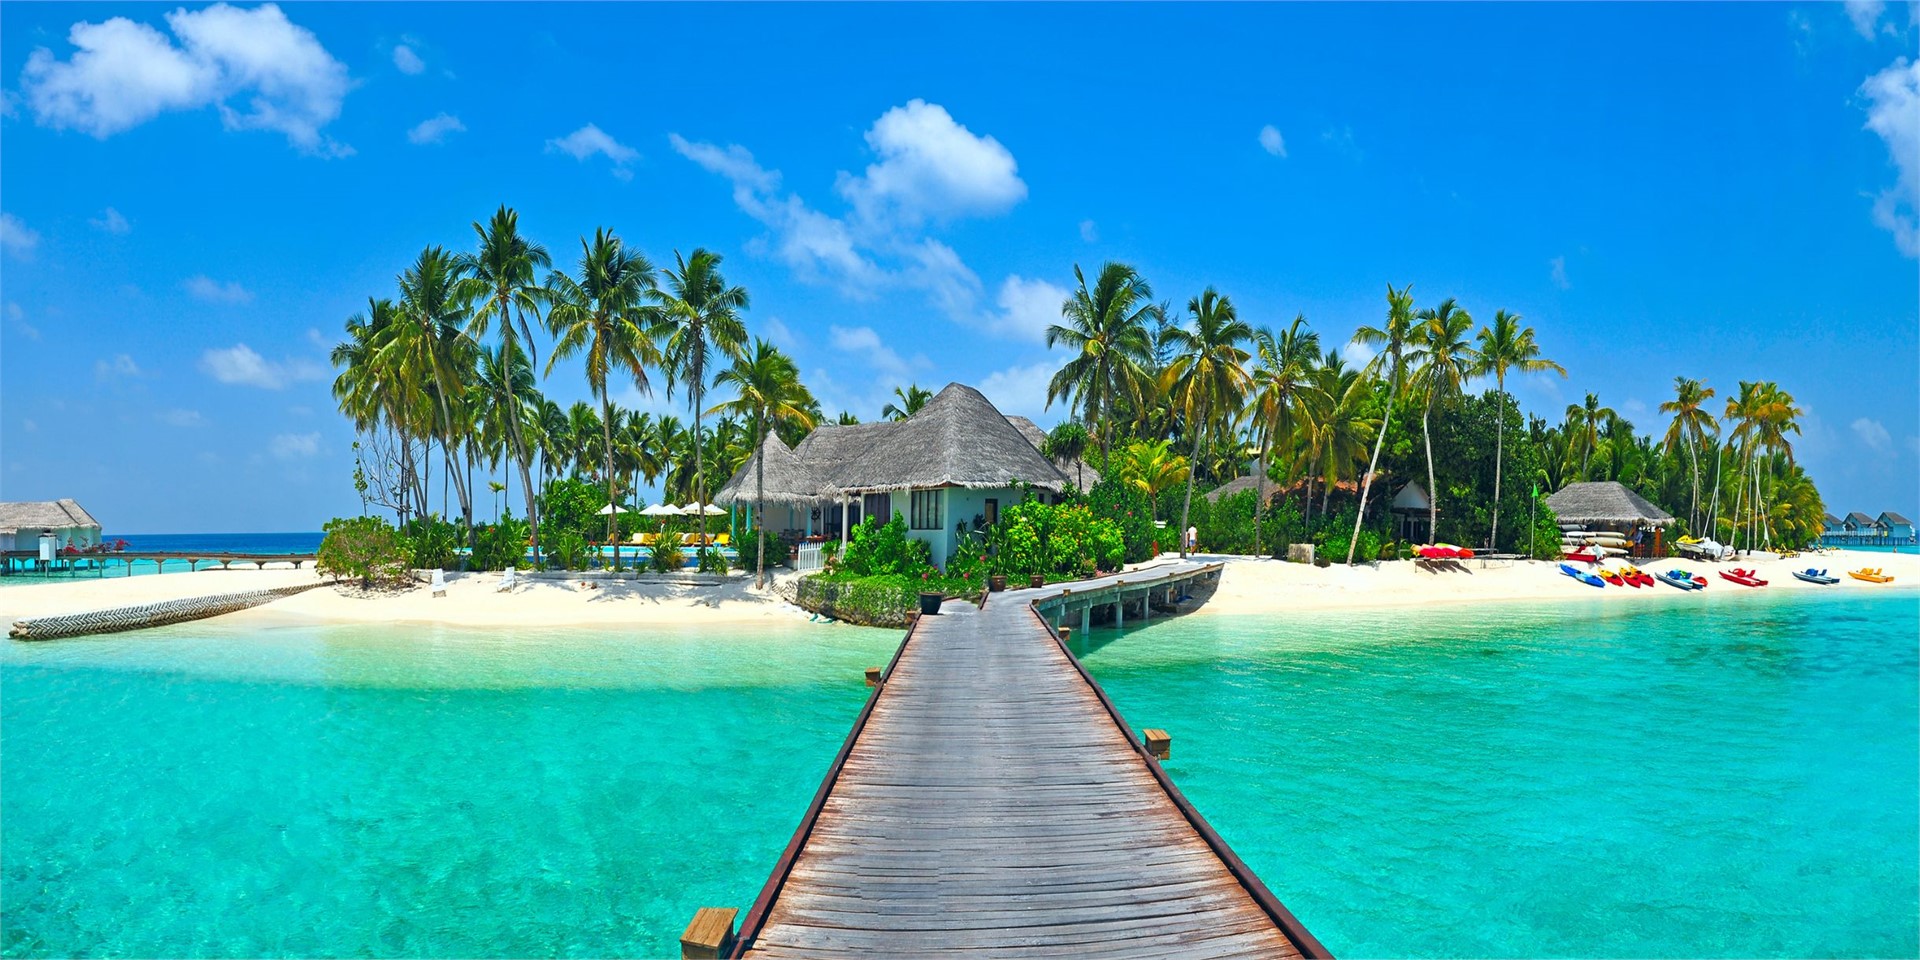 Hotels and accommodation in Maldives